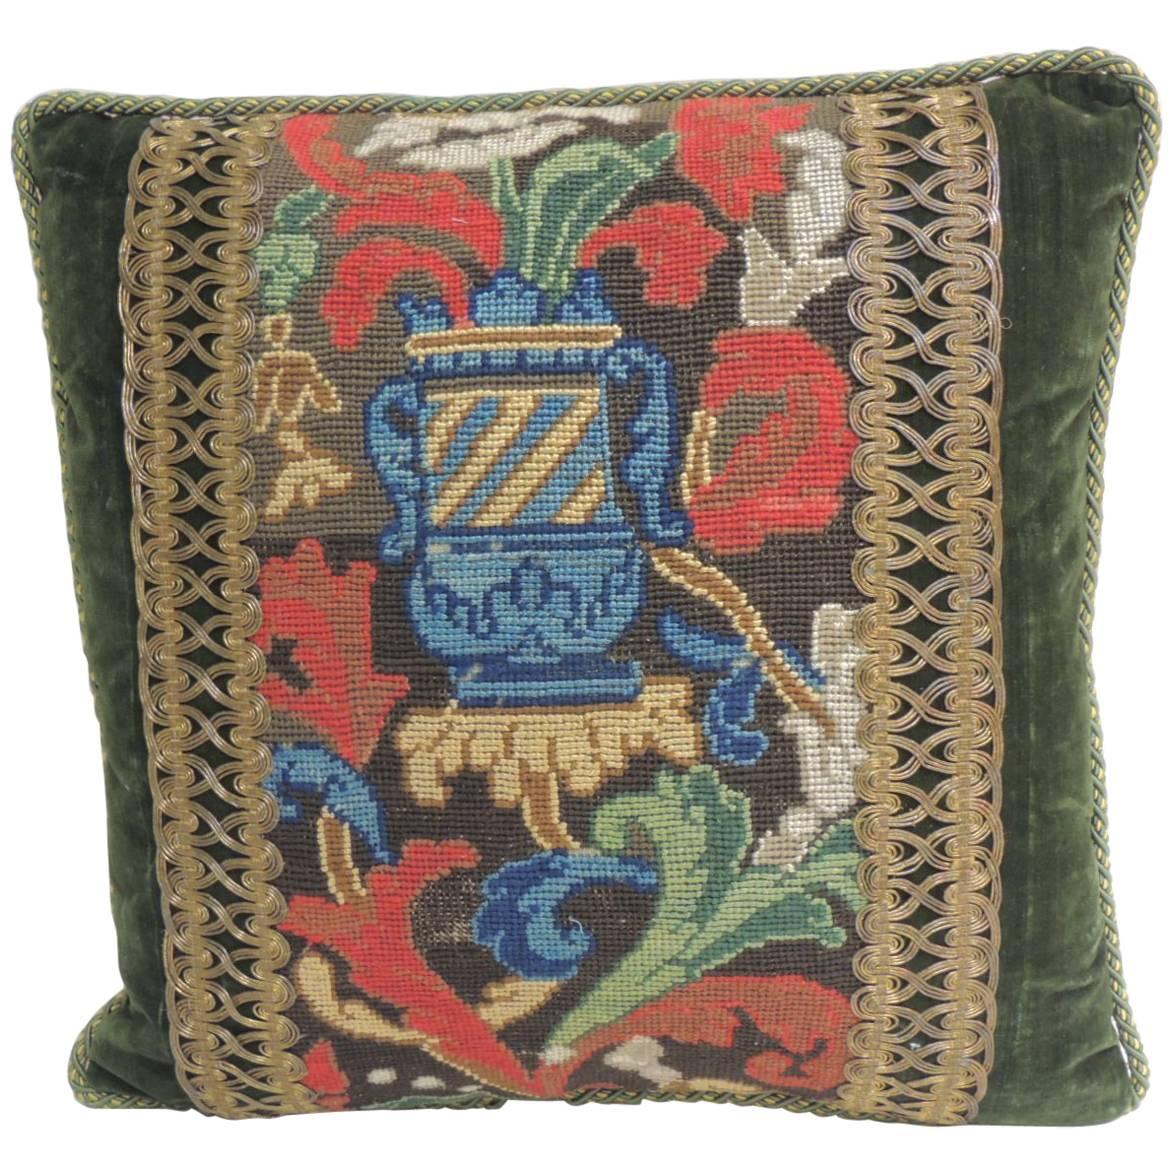  Antique Blue and Red Tapestry Decorative Pillow with Gold Metallic Trims For Sale